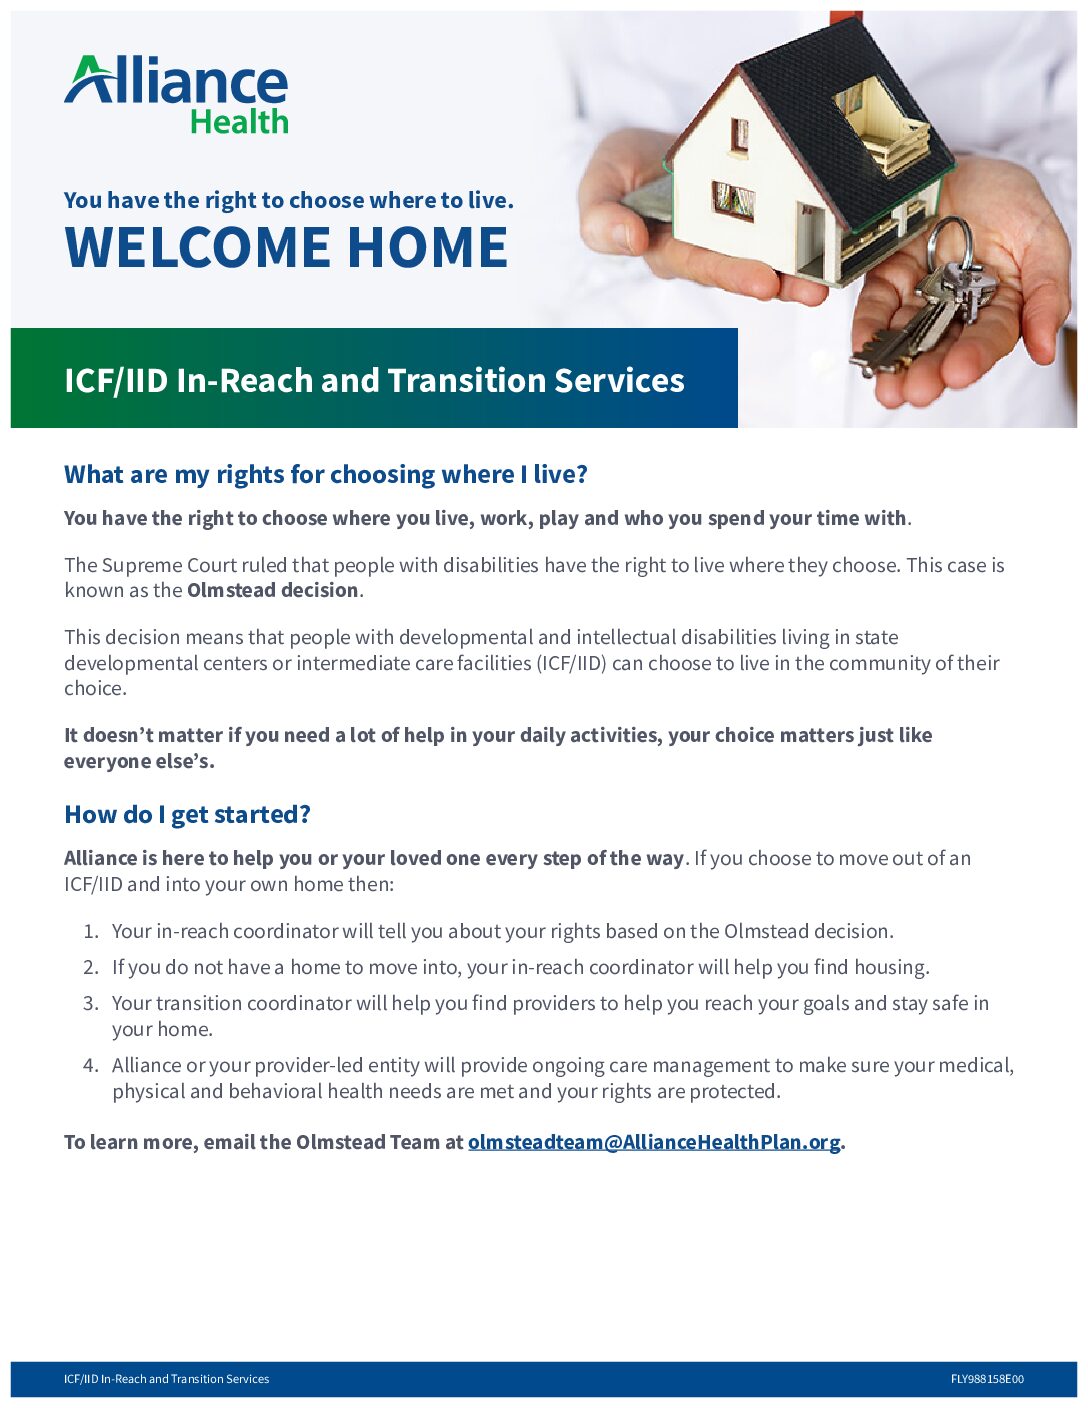 ICF/IID In-Reach and Transition Services